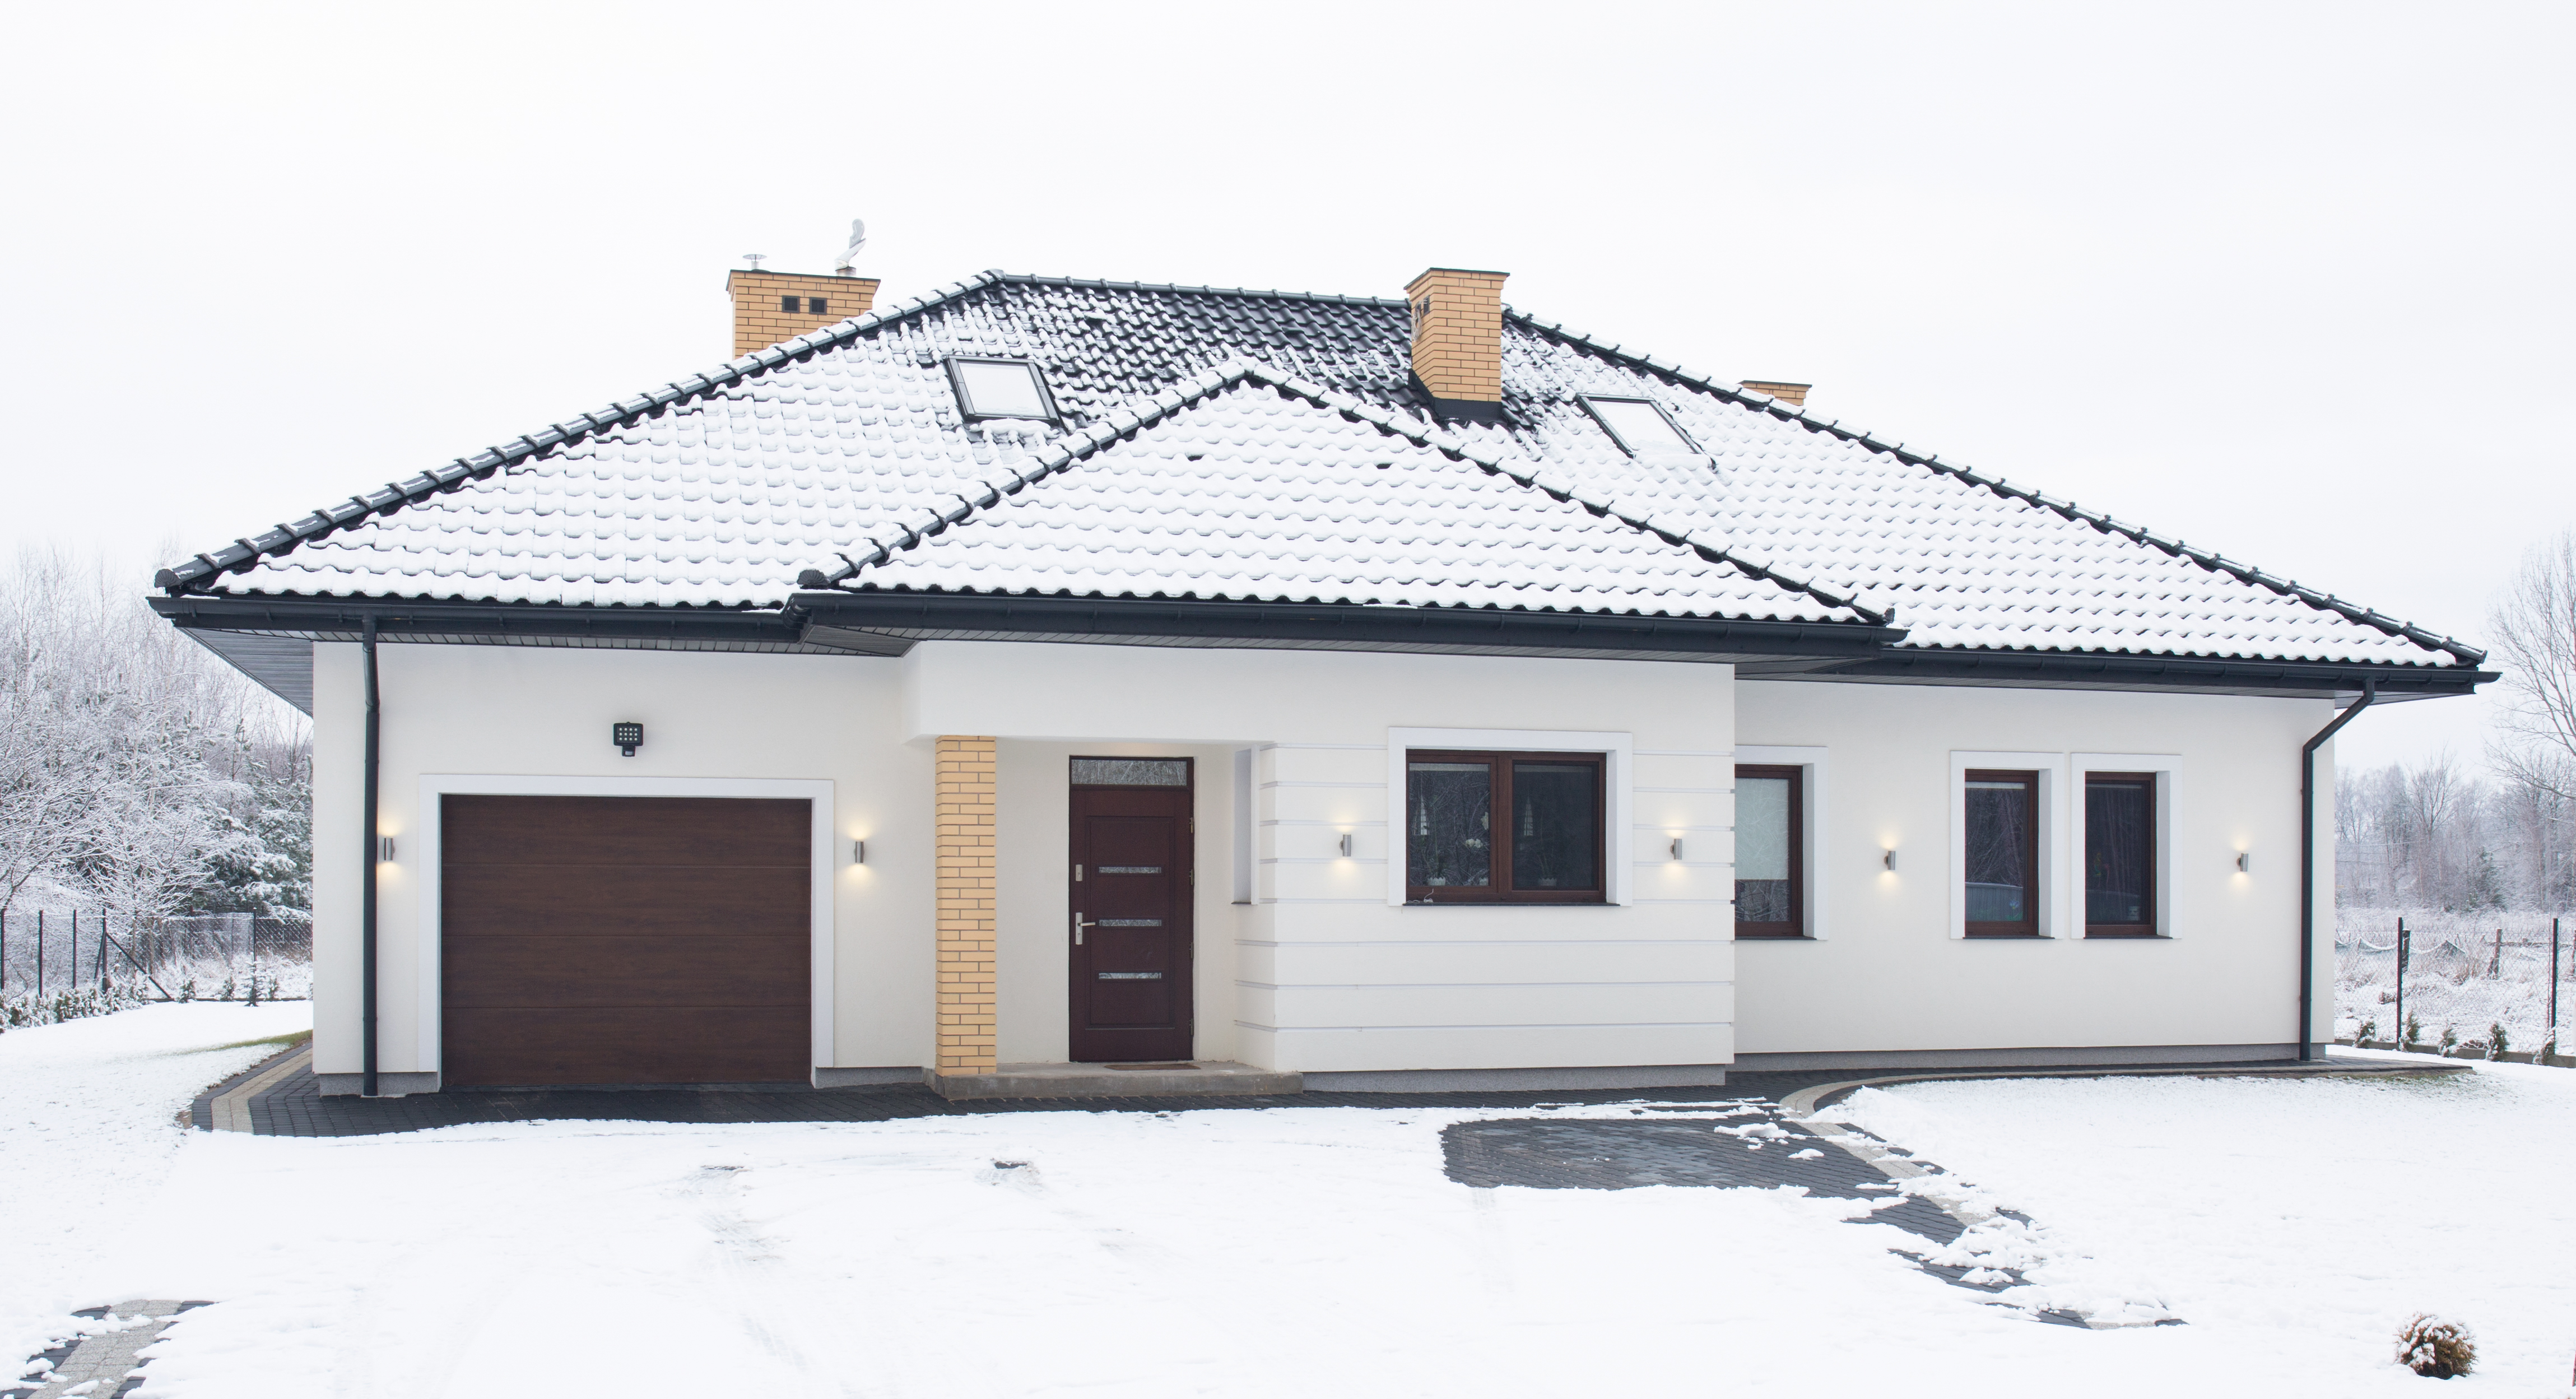 Tips to Keep Your Garage and Home Warm in the Winter